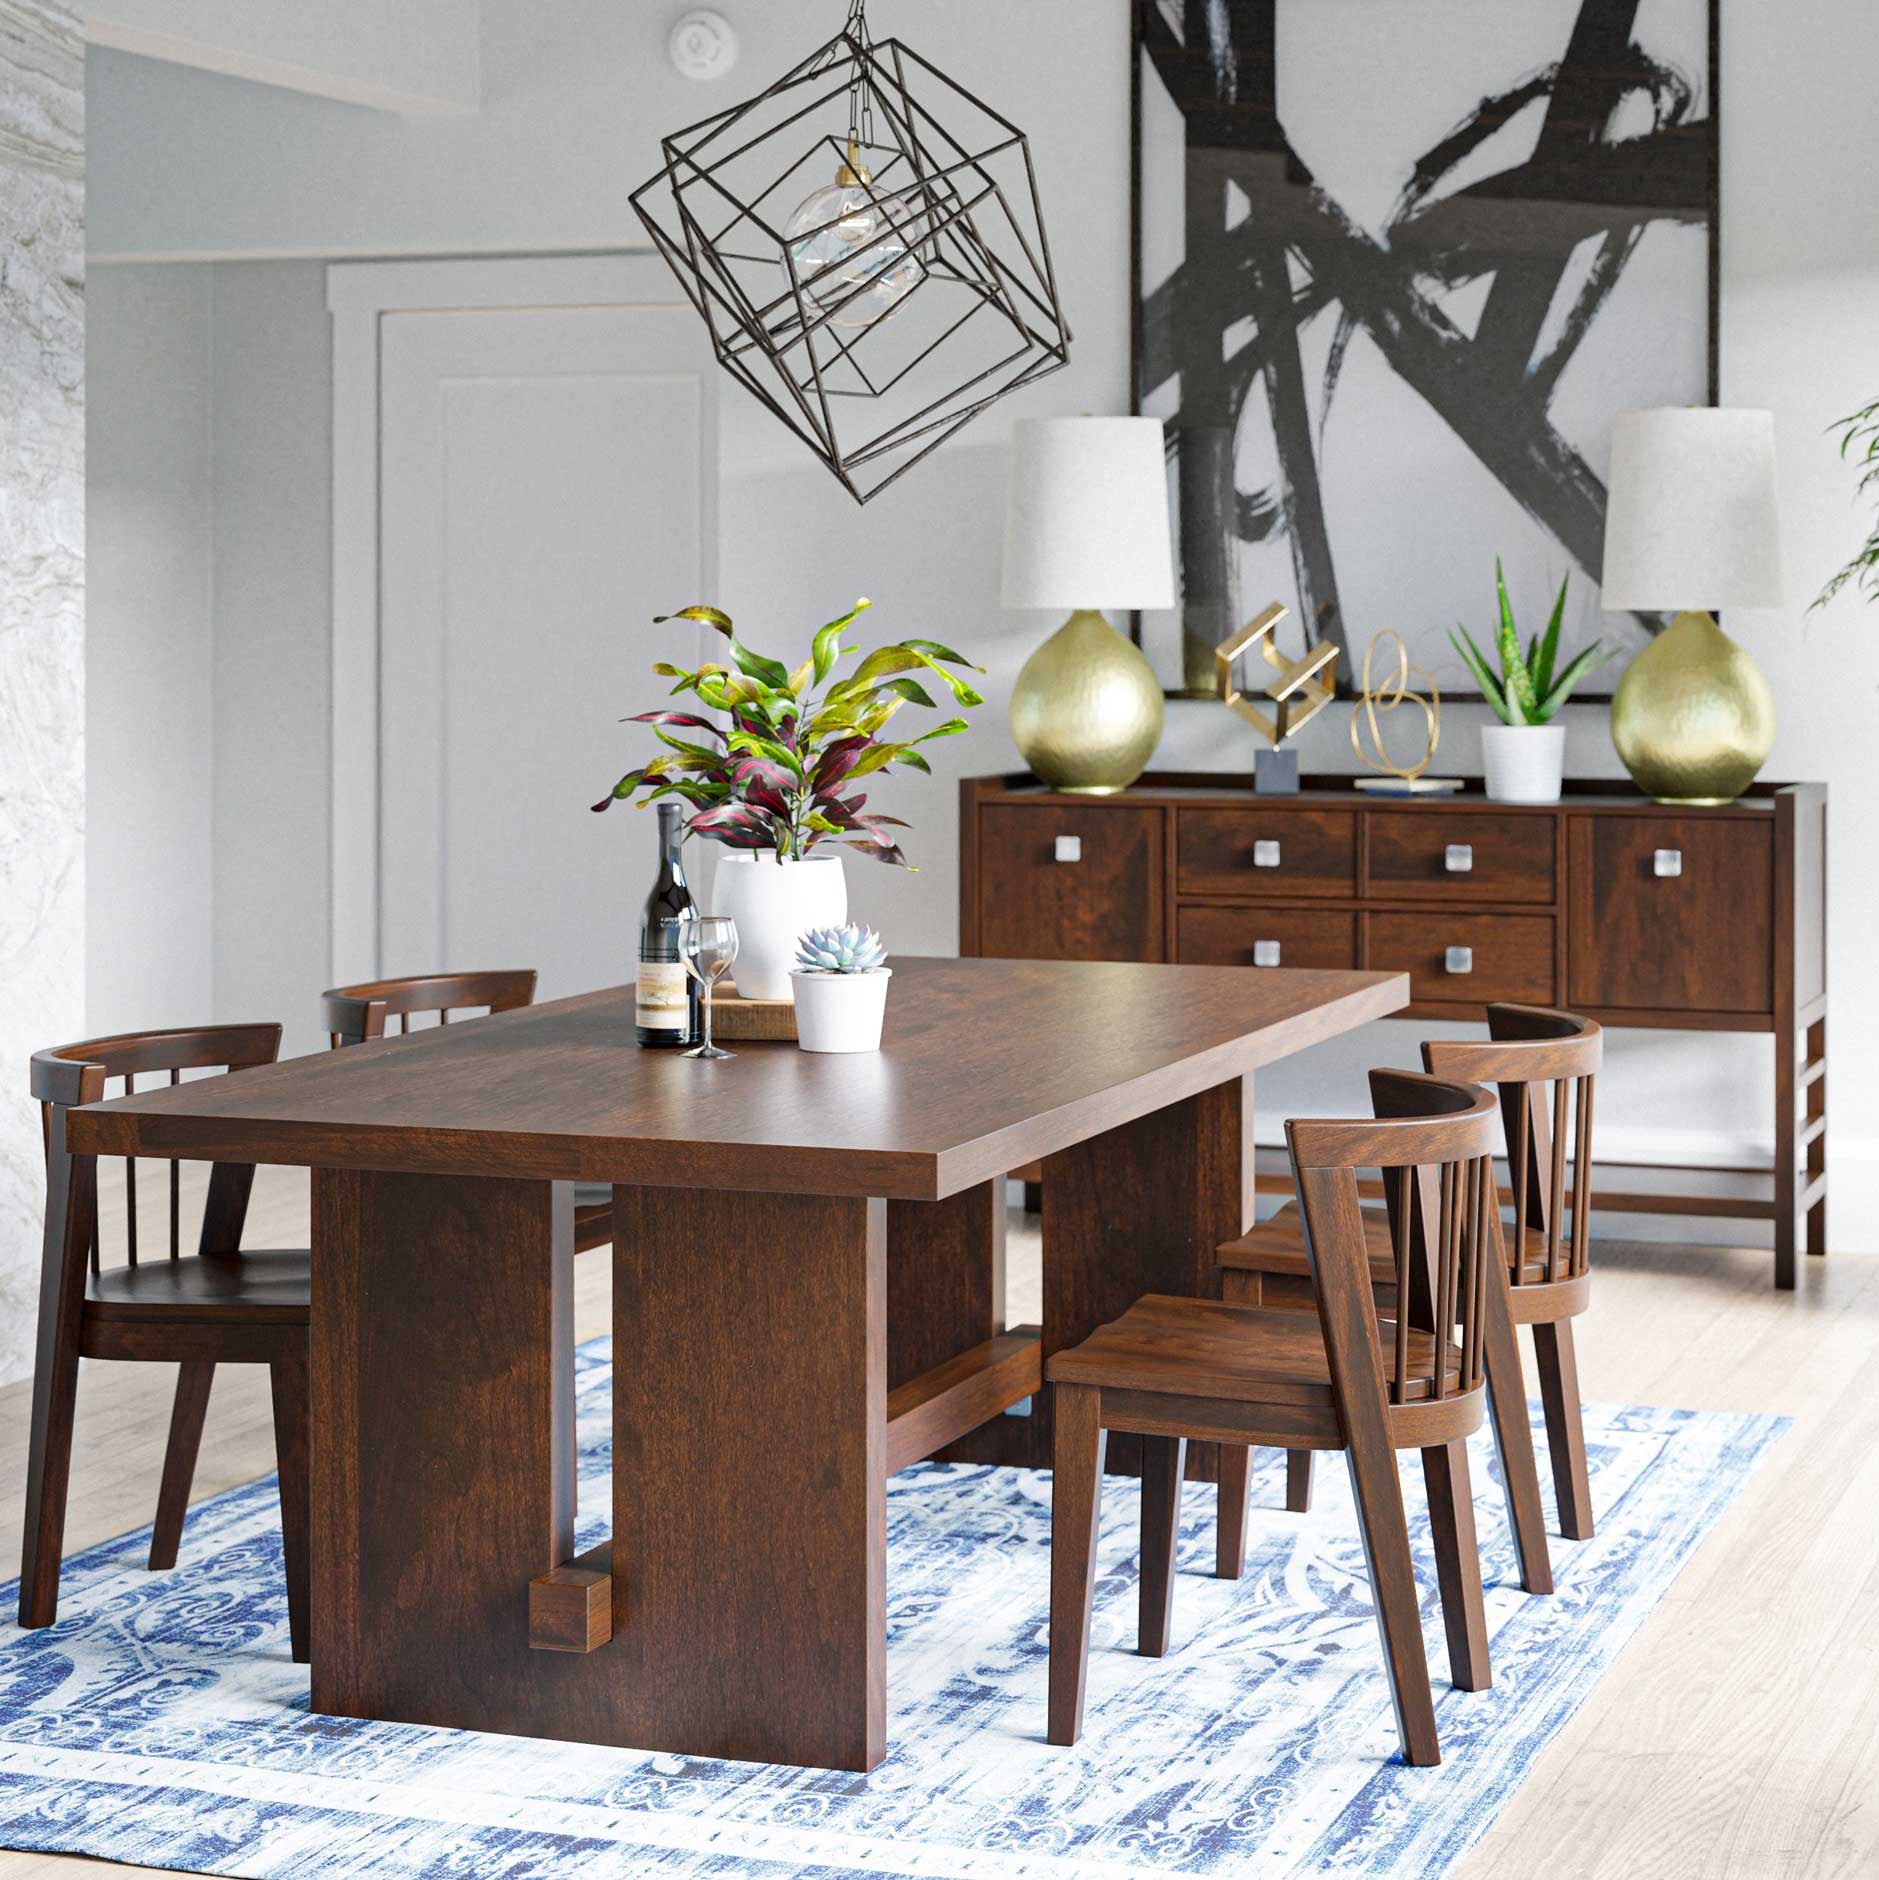 Stowe Trestle Table - snyders.furniture